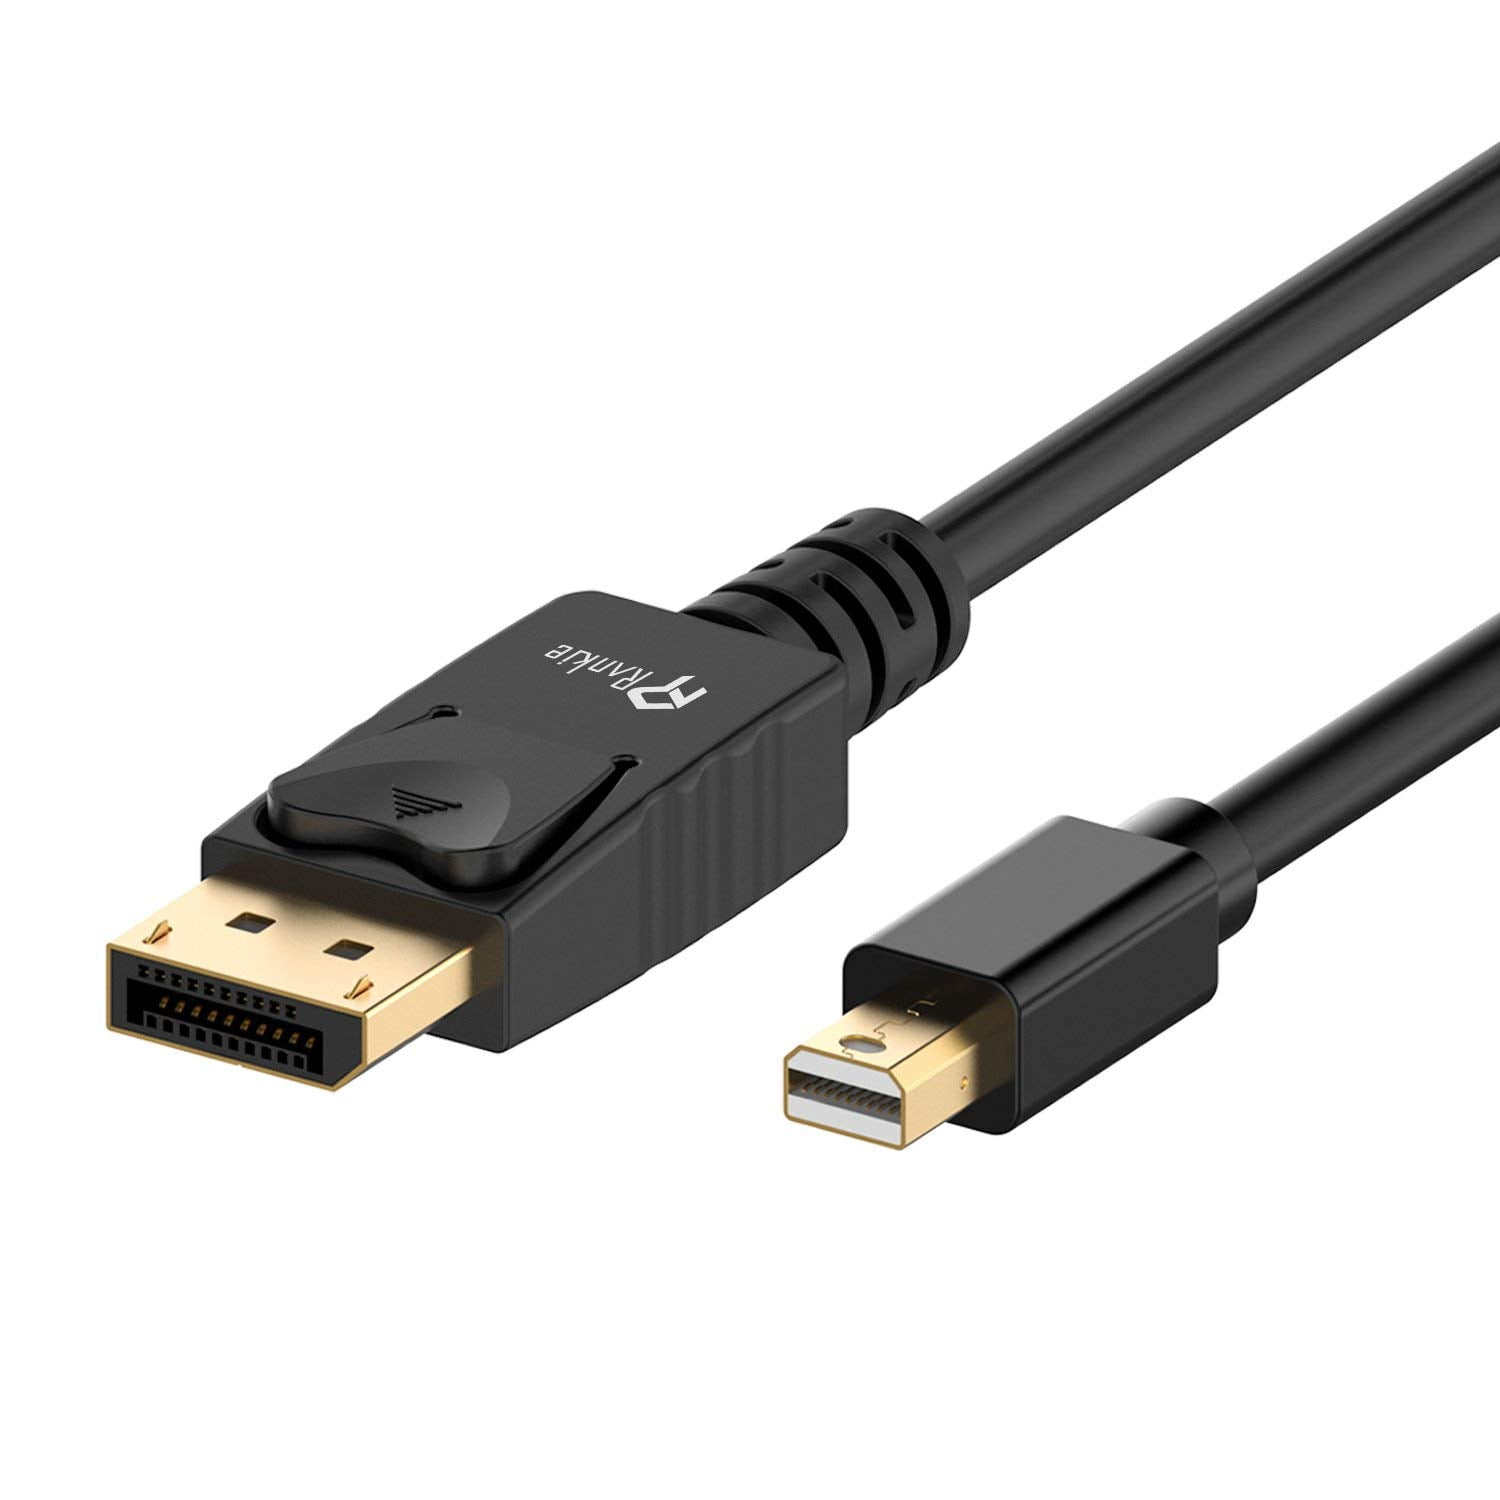 Thunderbolt Thunderbolt 2 Port Compatible Cable Matters Mini DisplayPort to DisplayPort Cable Mini DP to DP in Black 10 Feet 